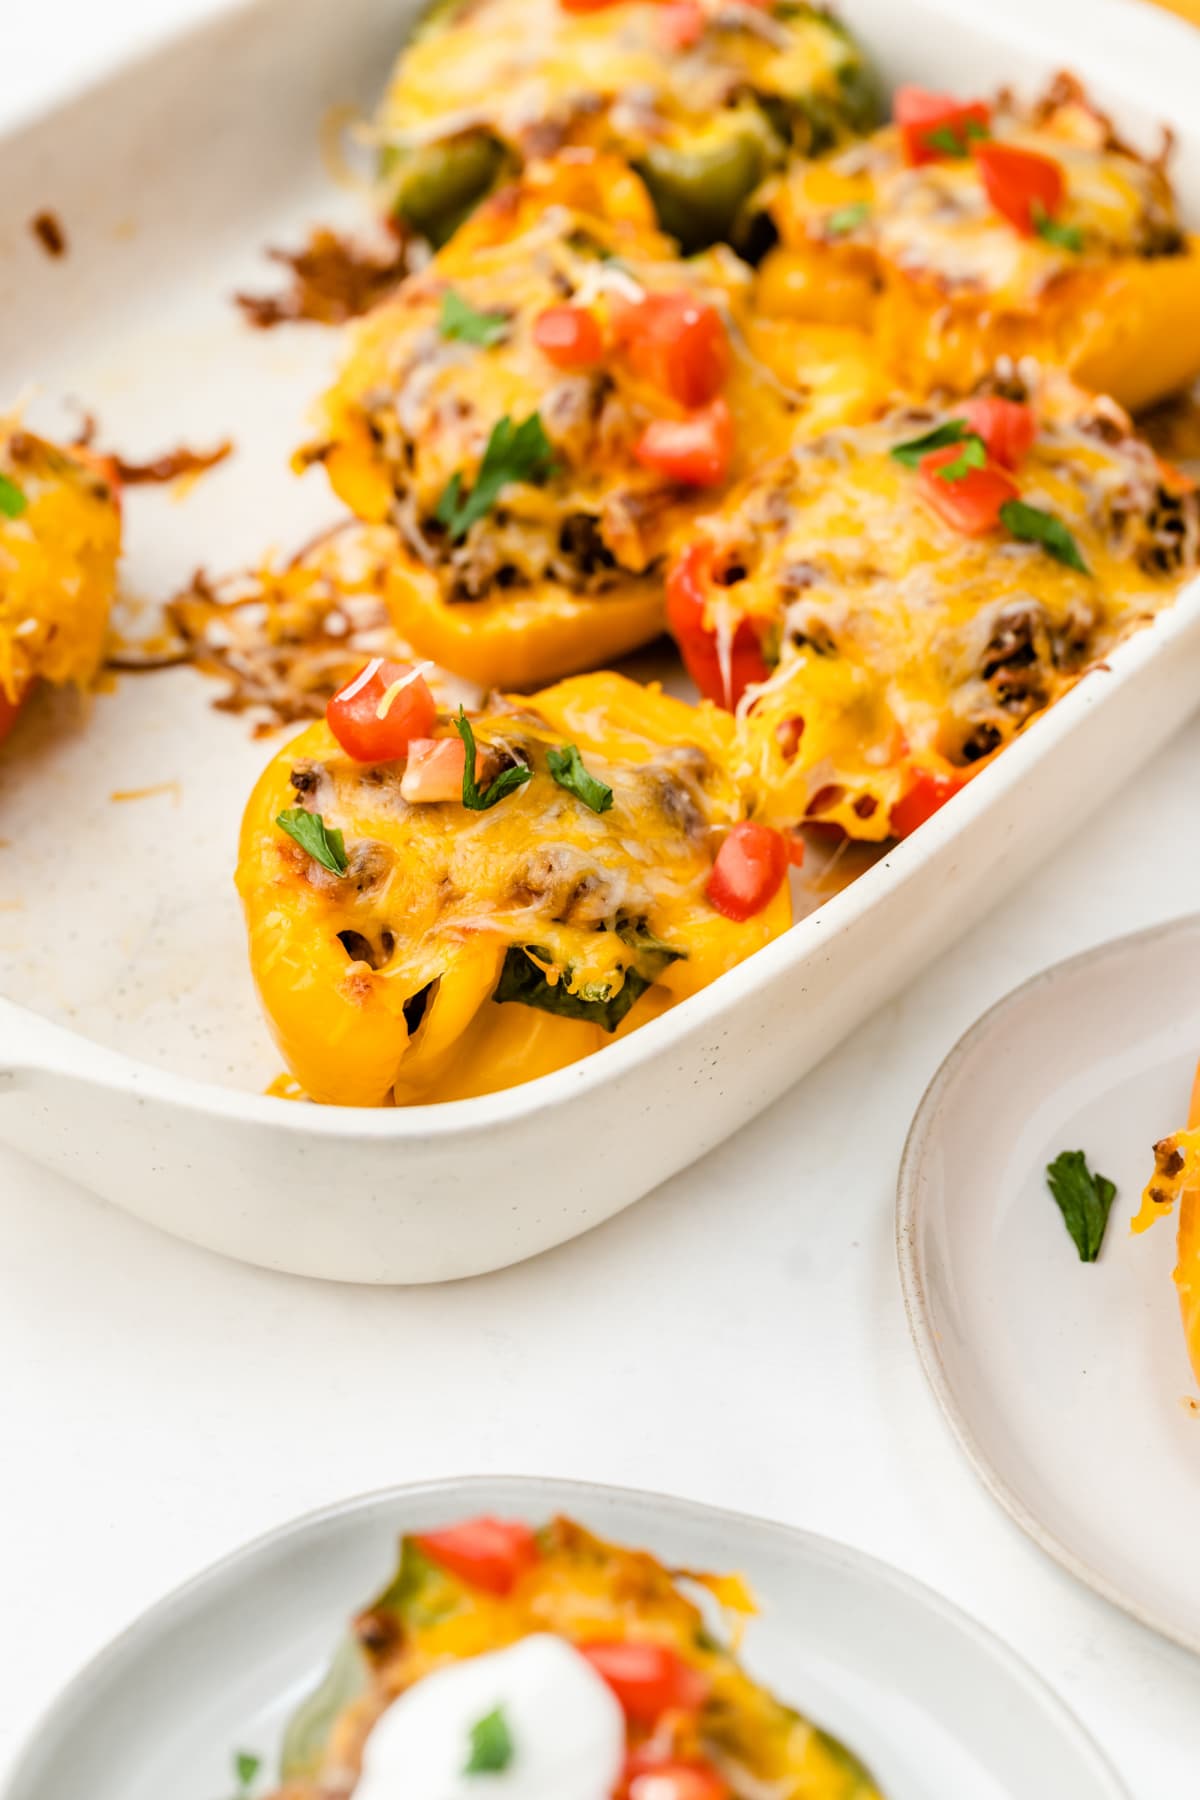 Casserole dish with taco stuffed peppers